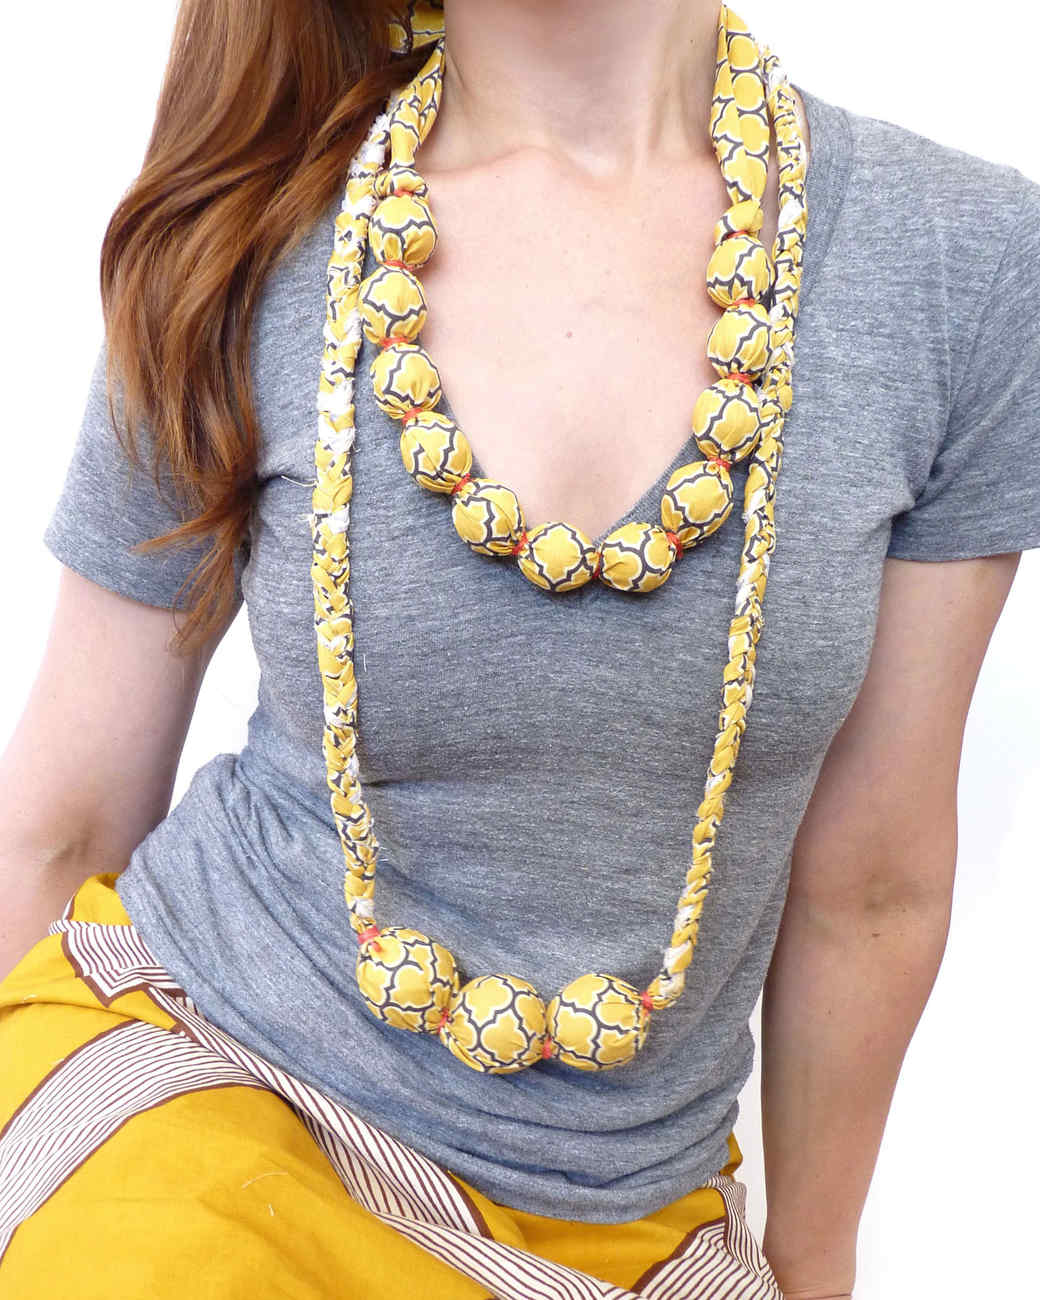 30 Handmade Necklaces That Make a Stunning First ...